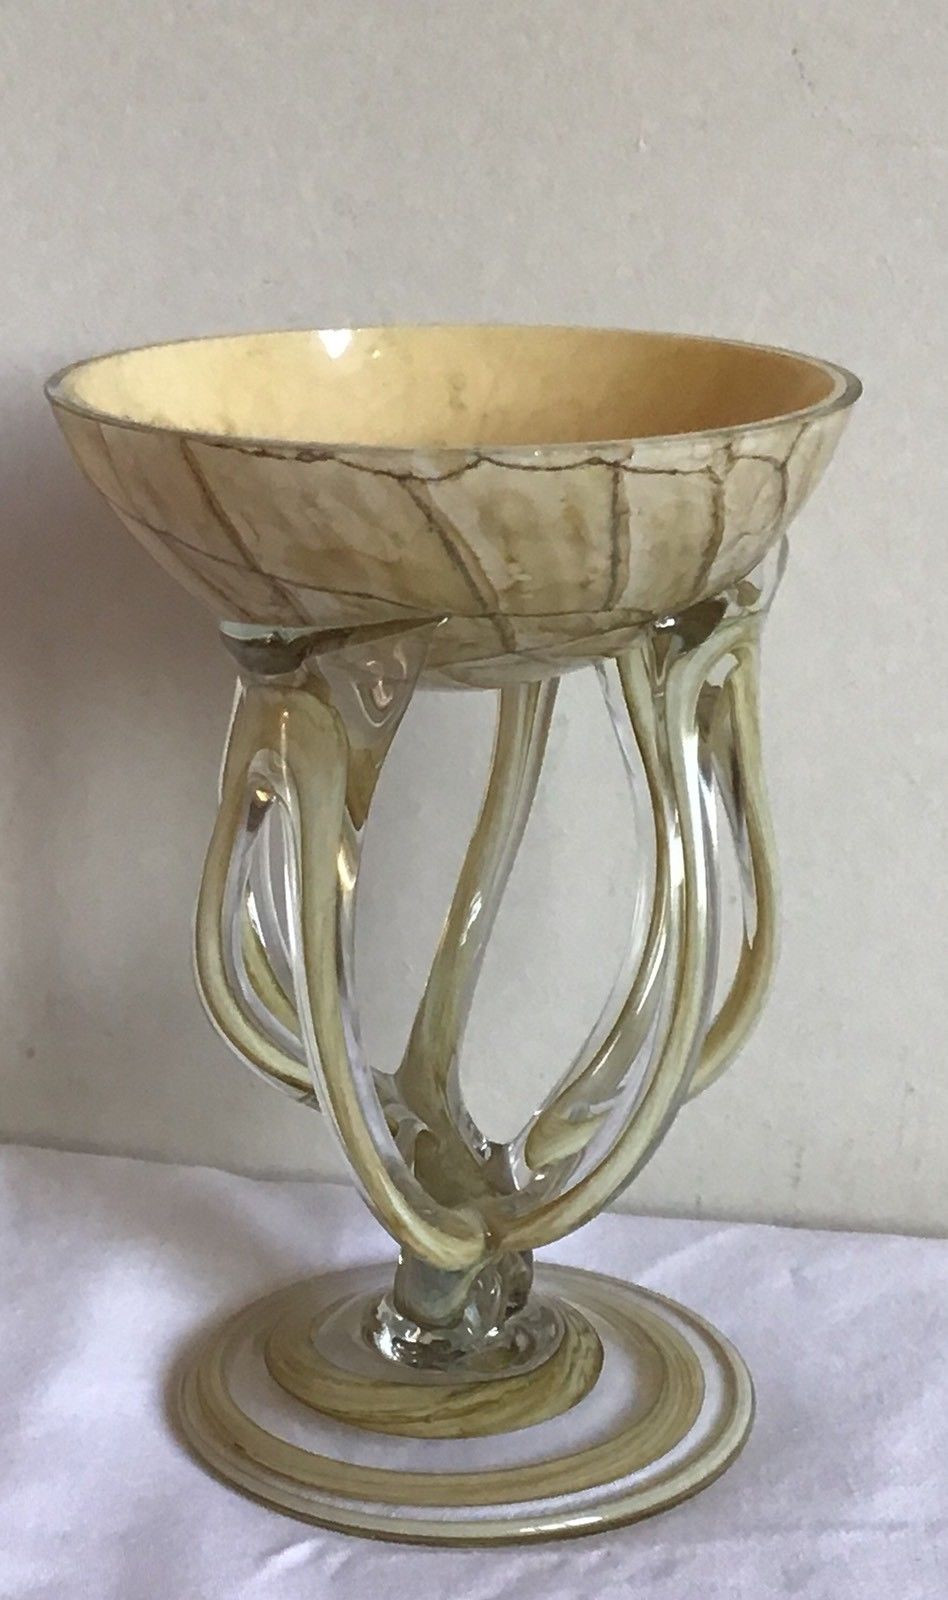 23 Ideal Jozefina Art Glass Vase 2024 free download jozefina art glass vase of rare jozefina krosno art glass compote cream swirled octopus inside rare jozefina krosno art glass compote cream swirled octopus jellyfish vase dish 1 of 7 see mor